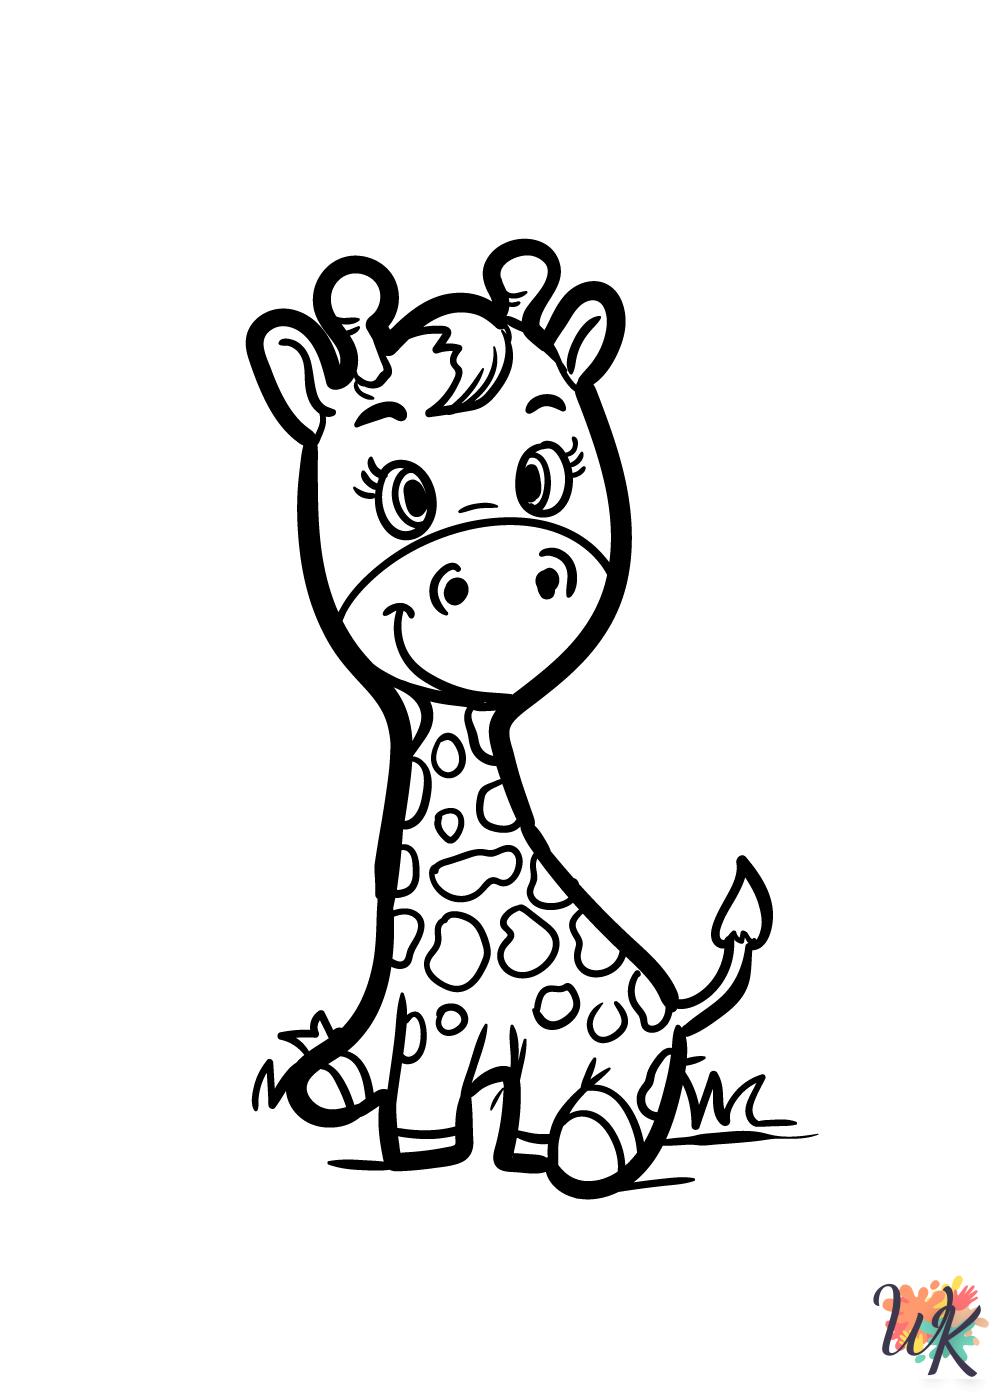 Giraffe ornament coloring pages